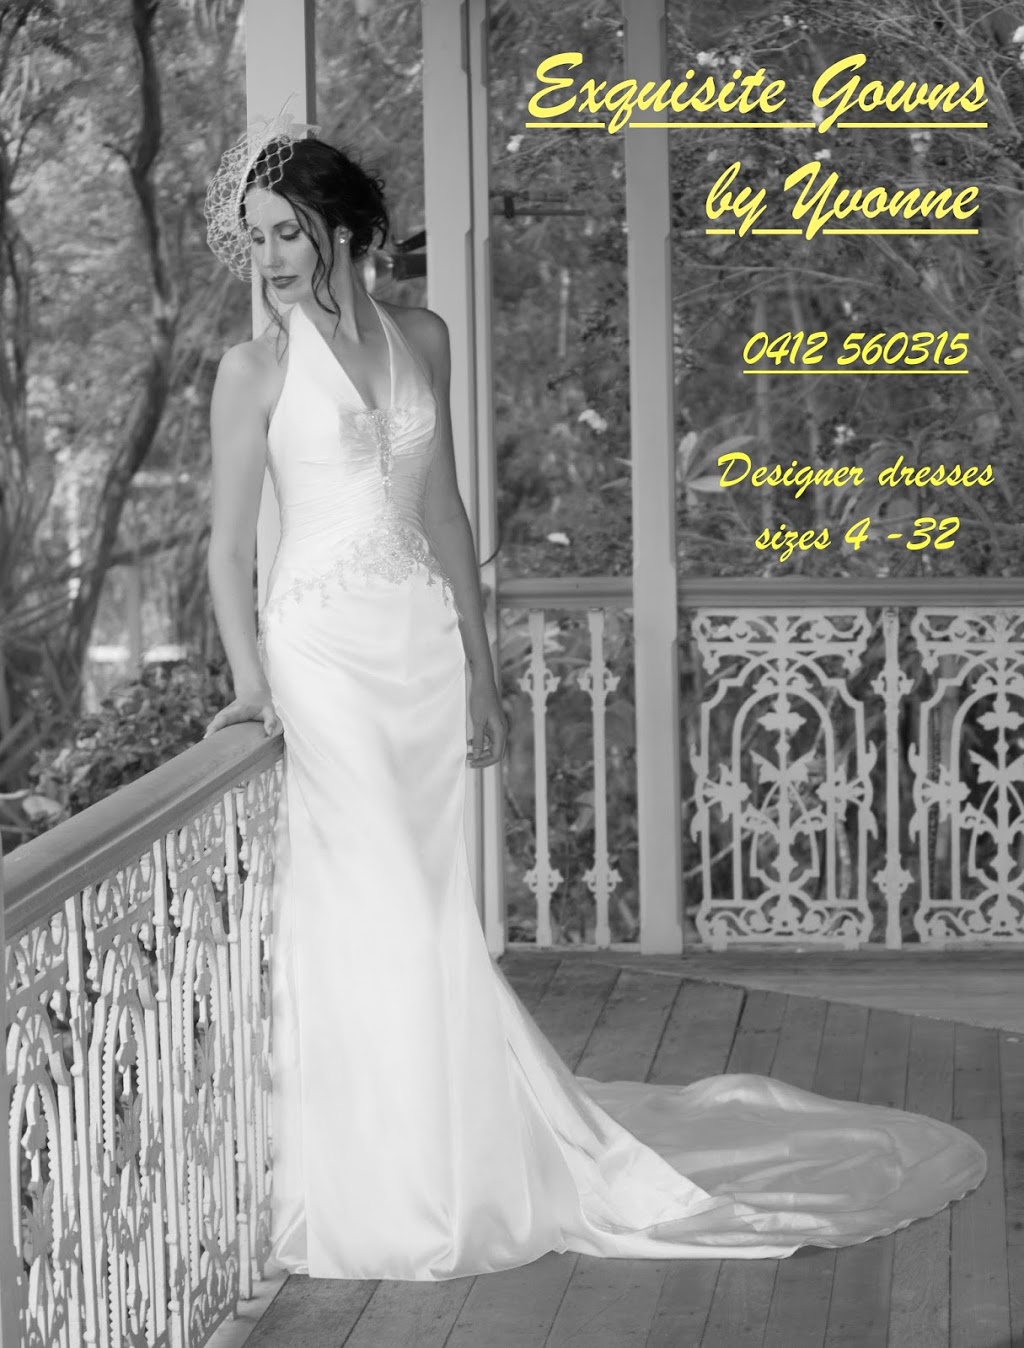 Exquisite Gowns by Yvonne | 47 Woodrose Rd, Morayfield QLD 4506, Australia | Phone: 0412 560 315